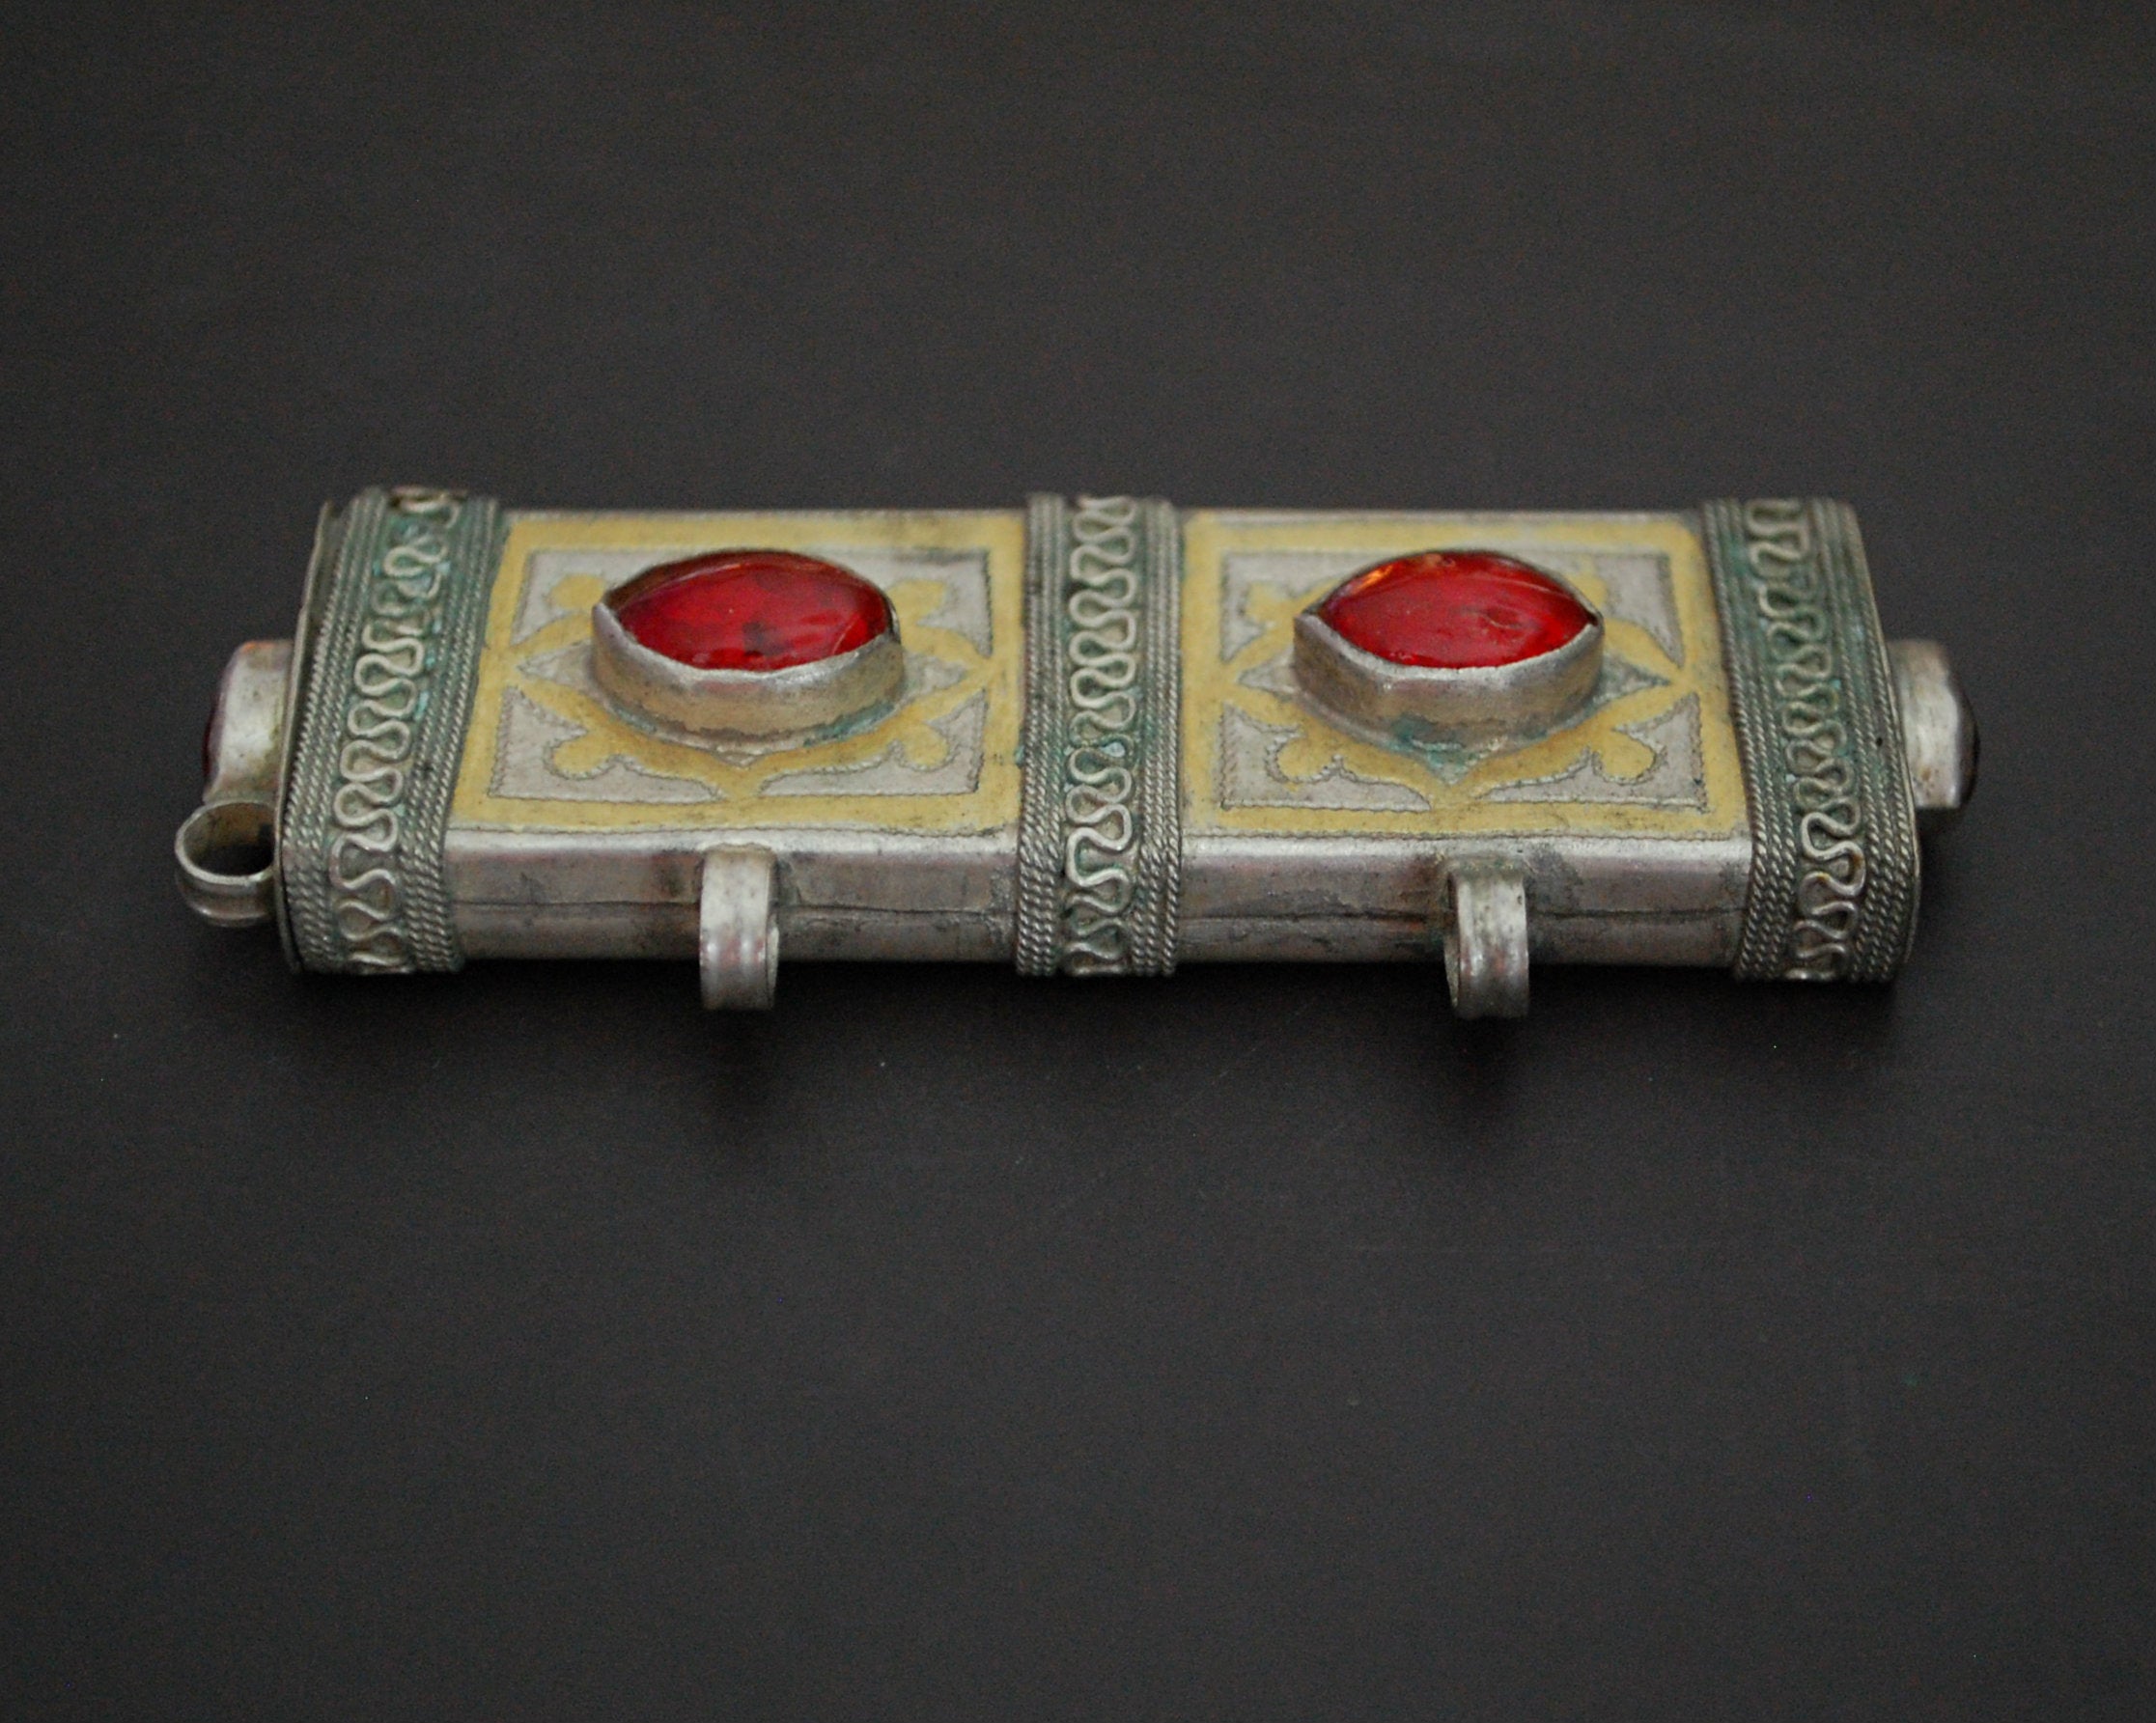 Turkmen Gilded Box Pendant with Red Glass